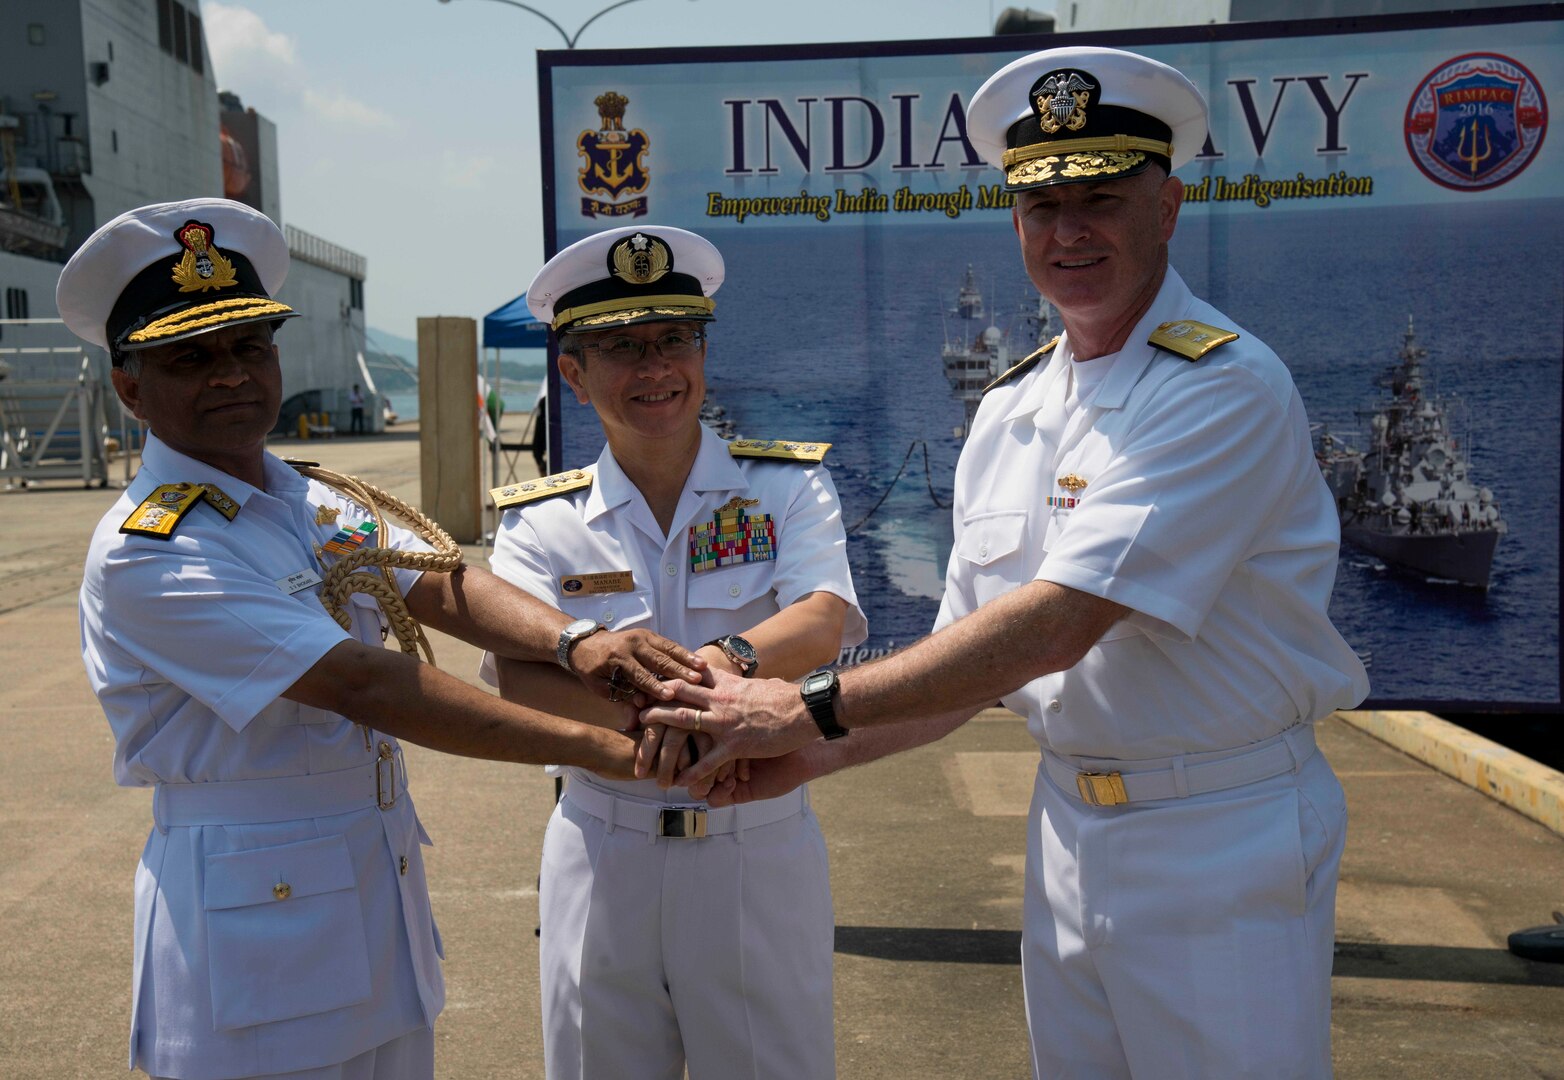 160610-N-QY759-141
 SASEBO, Japan (June 10, 2016) – Indian navy Flag Officer Commanding-in-Chief, Eastern Naval Command Vice Adm. Harish Bisht, Japan Maritime Self-Defense Force Escort Flotilla 3 Commander Rear Adm. Koji Manabe and U.S. 7th Fleet Deputy Commander Rear Adm. Brian Hurley shake hands after a Malabar 2016 press conference held at Commander, U.S. Fleet Activities Sasebo10 June. A trilateral maritime exercise, Malabar is designed to enhance dynamic cooperation between the Indian navy, Japan Maritime Self-Defense Force (JMSDF) and U.S. Navy forces in the Indo-Asia-Pacific. (U.S. Navy photo by Mass Communication Specialist 1st Class David R. Krigbaum/Released)